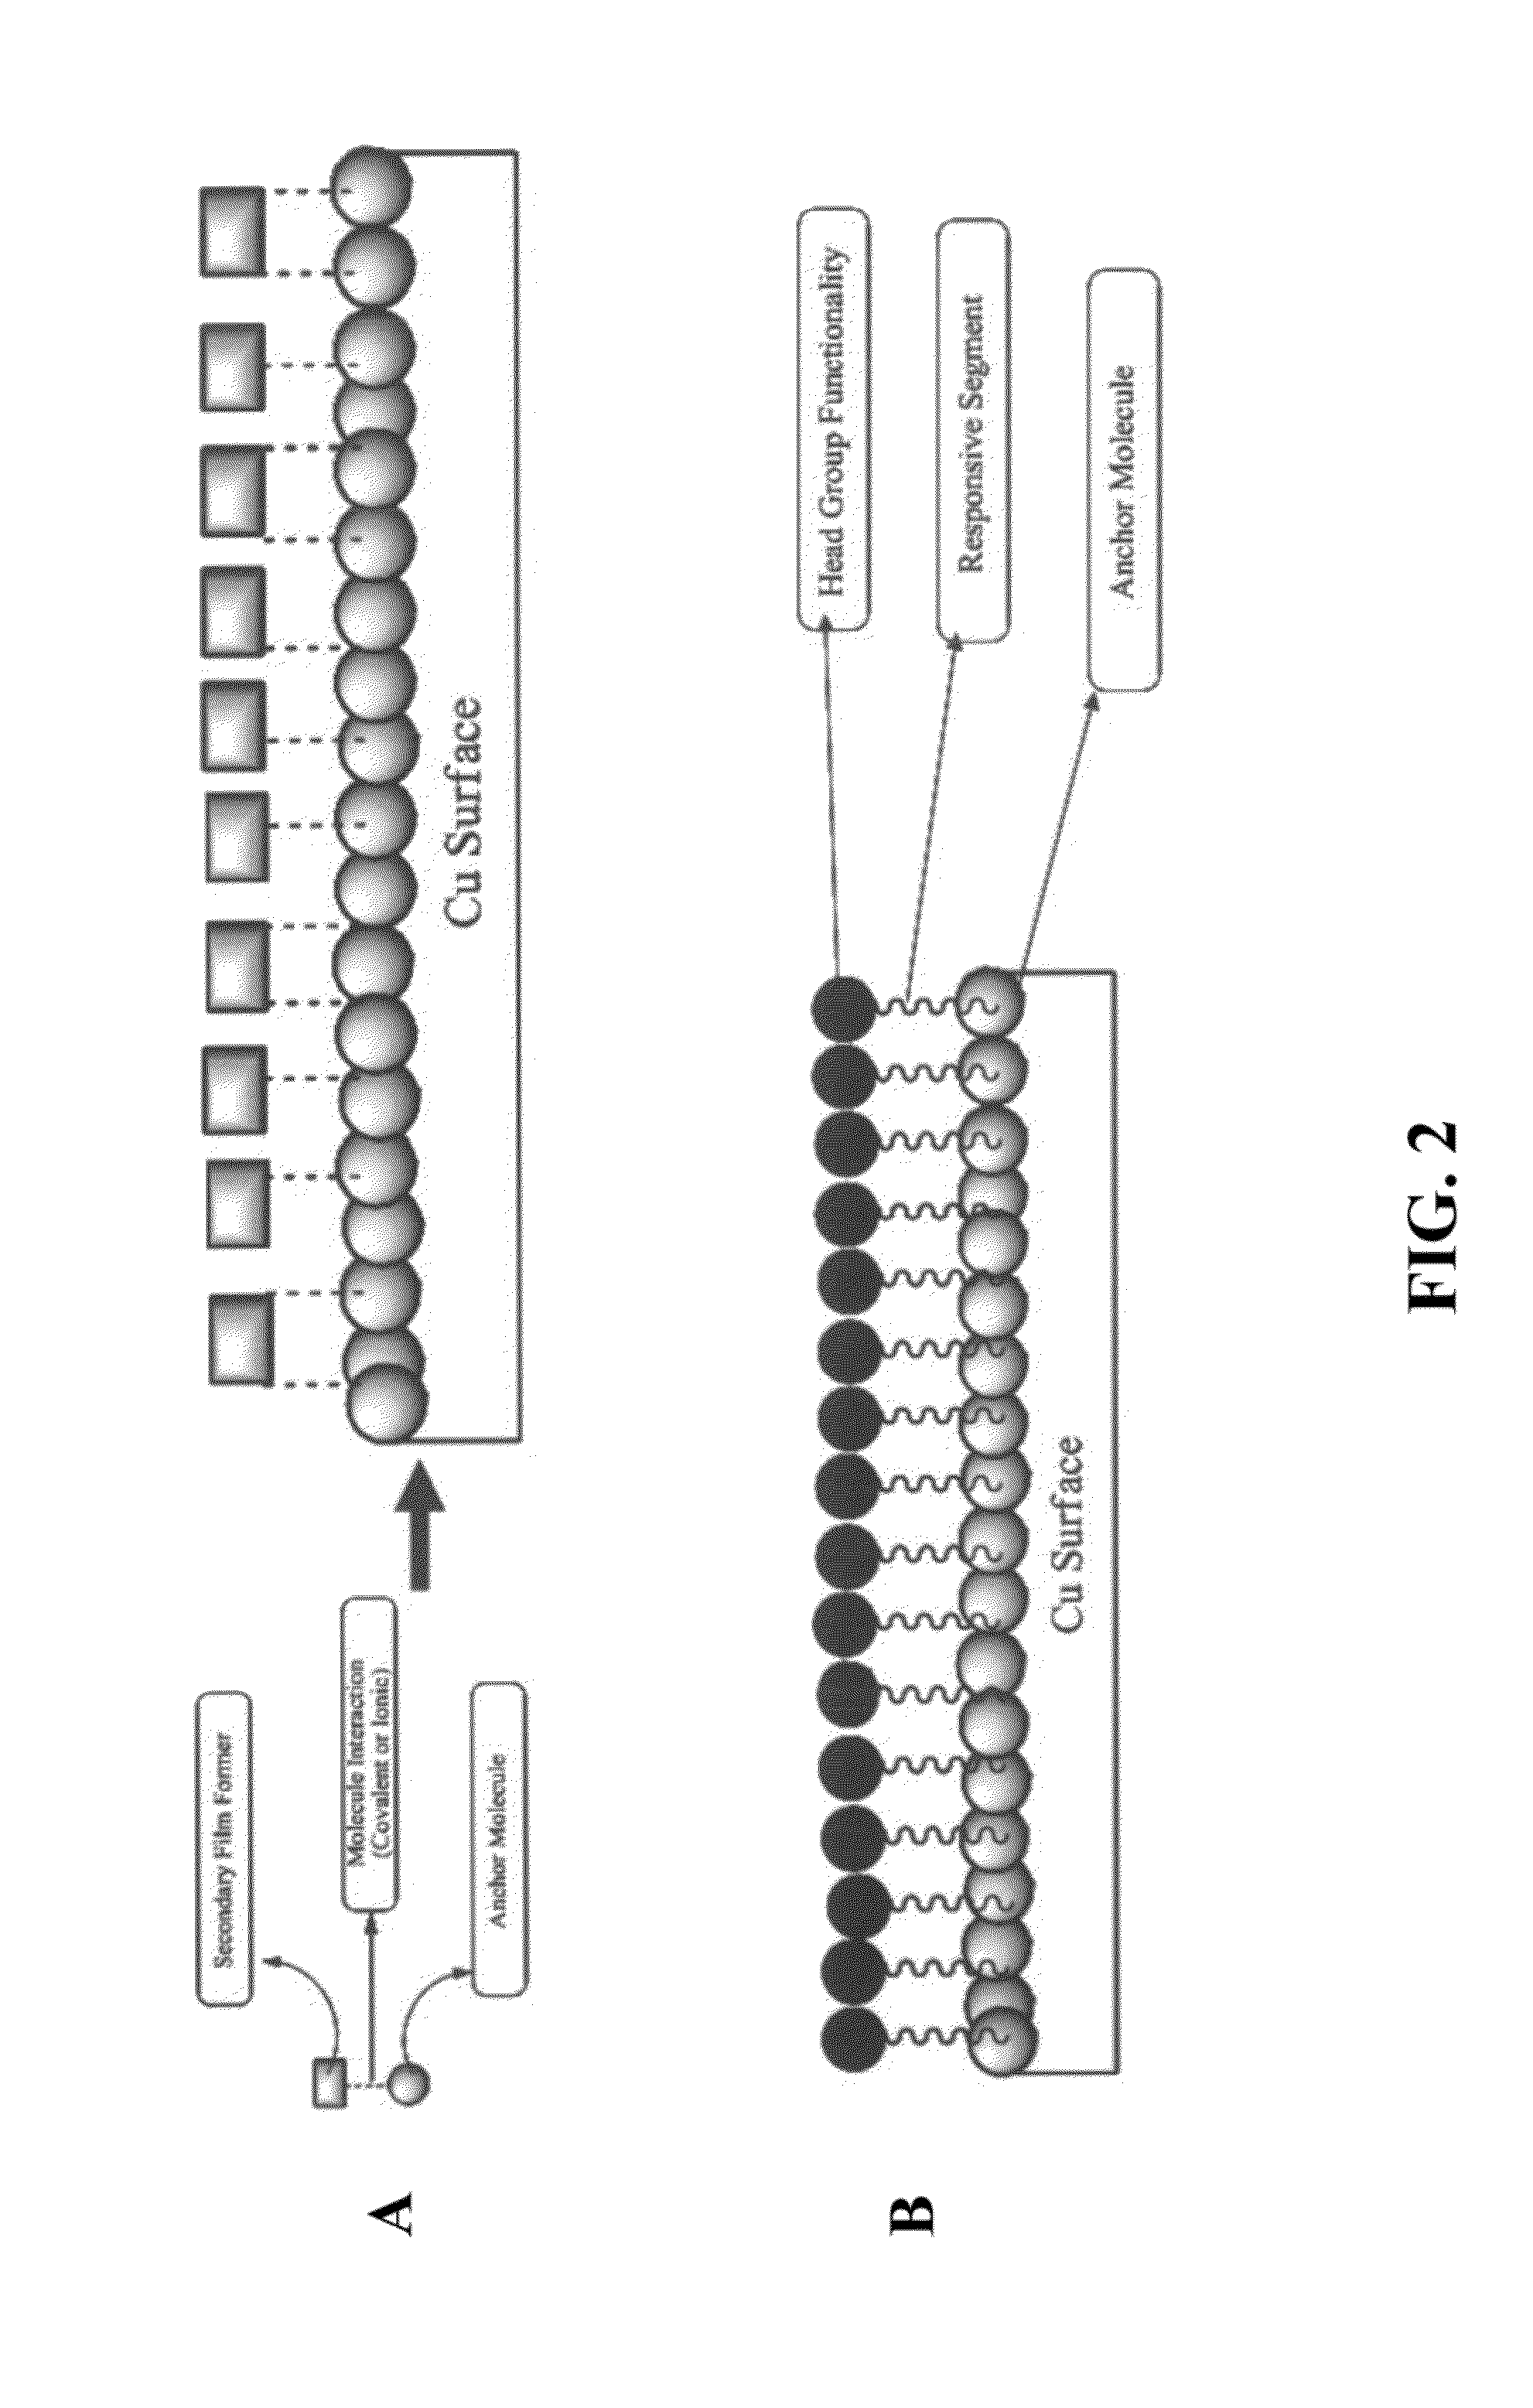 Metal-passivating CMP compositions and methods